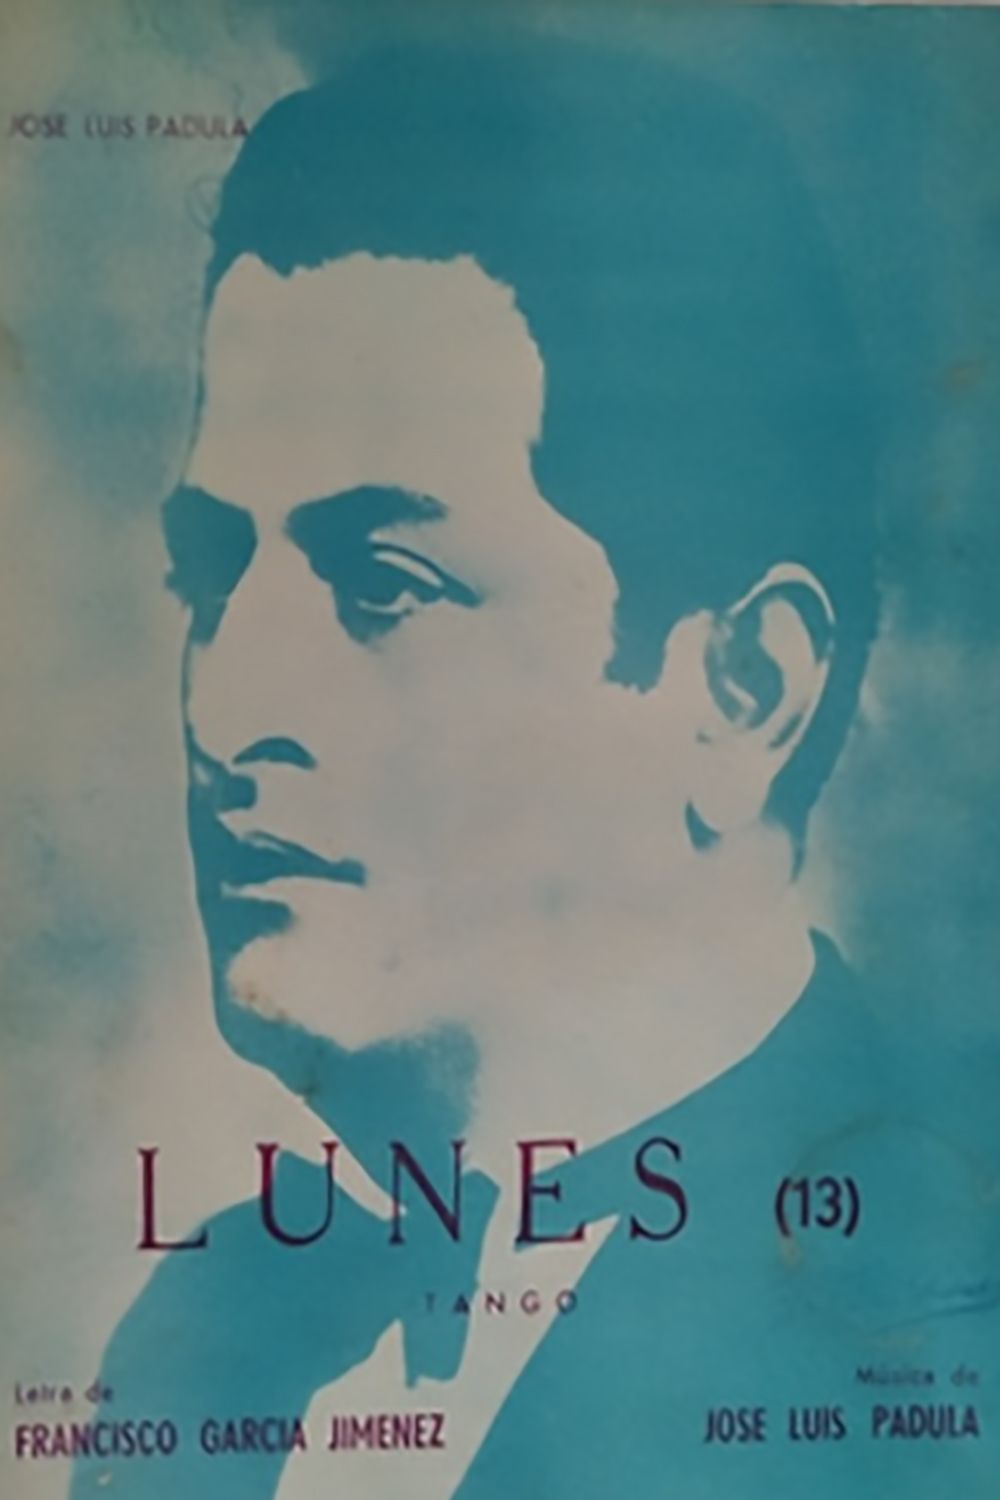 'Lunes', Argentine Tango music sheet cover.